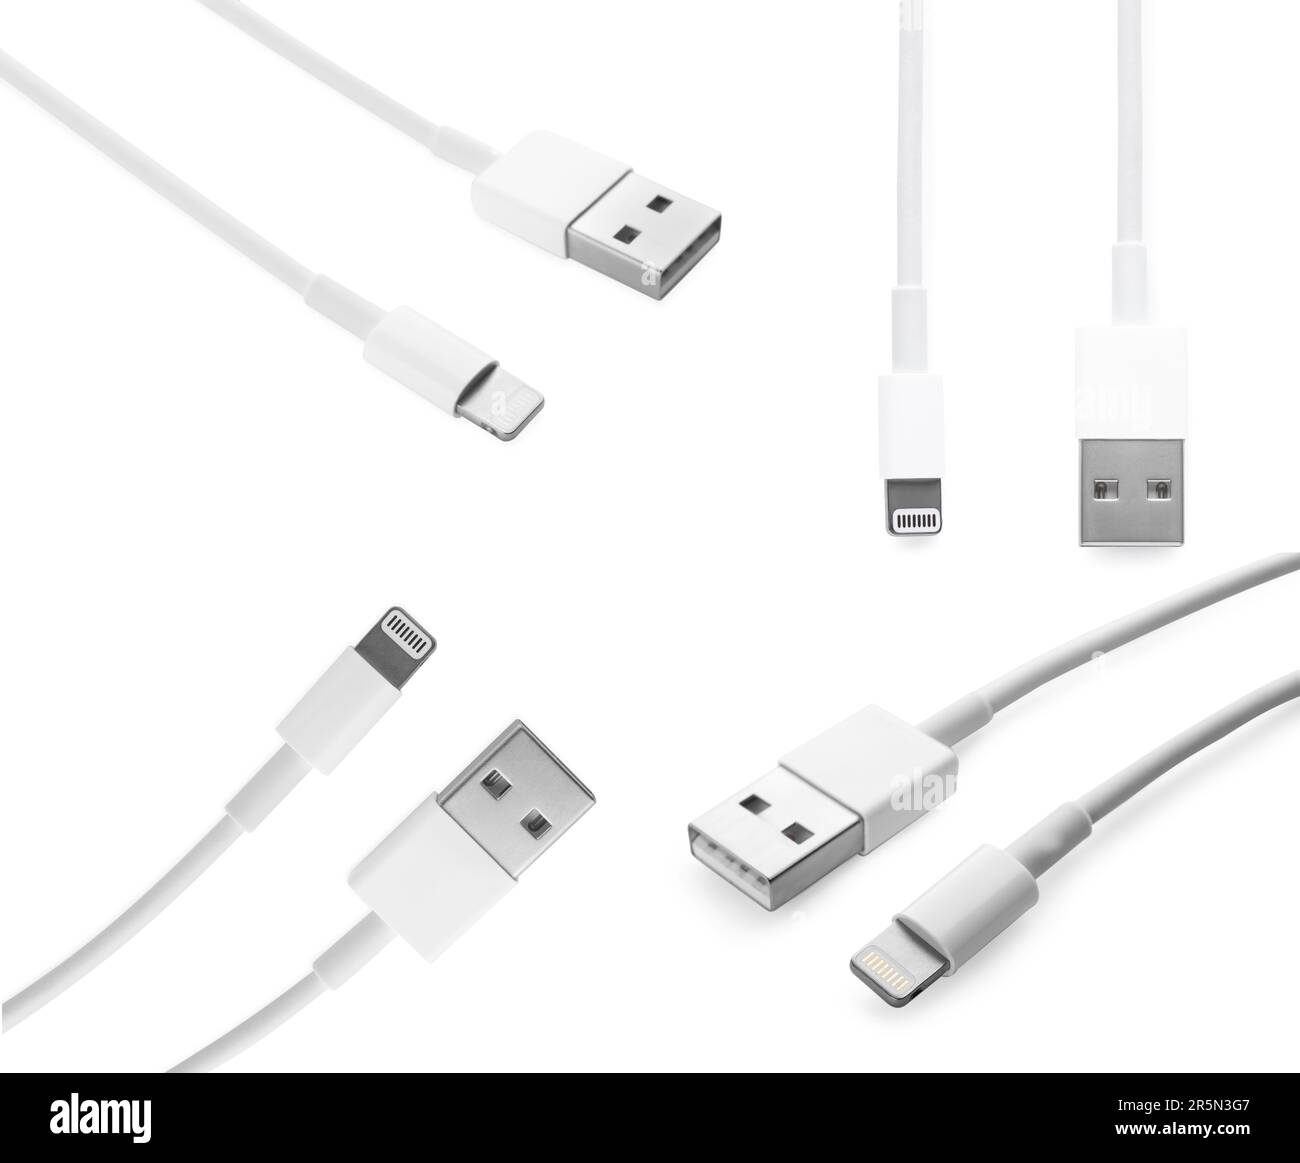 USB cable with lightning connector on white background, views from different sides. Collage design Stock Photo